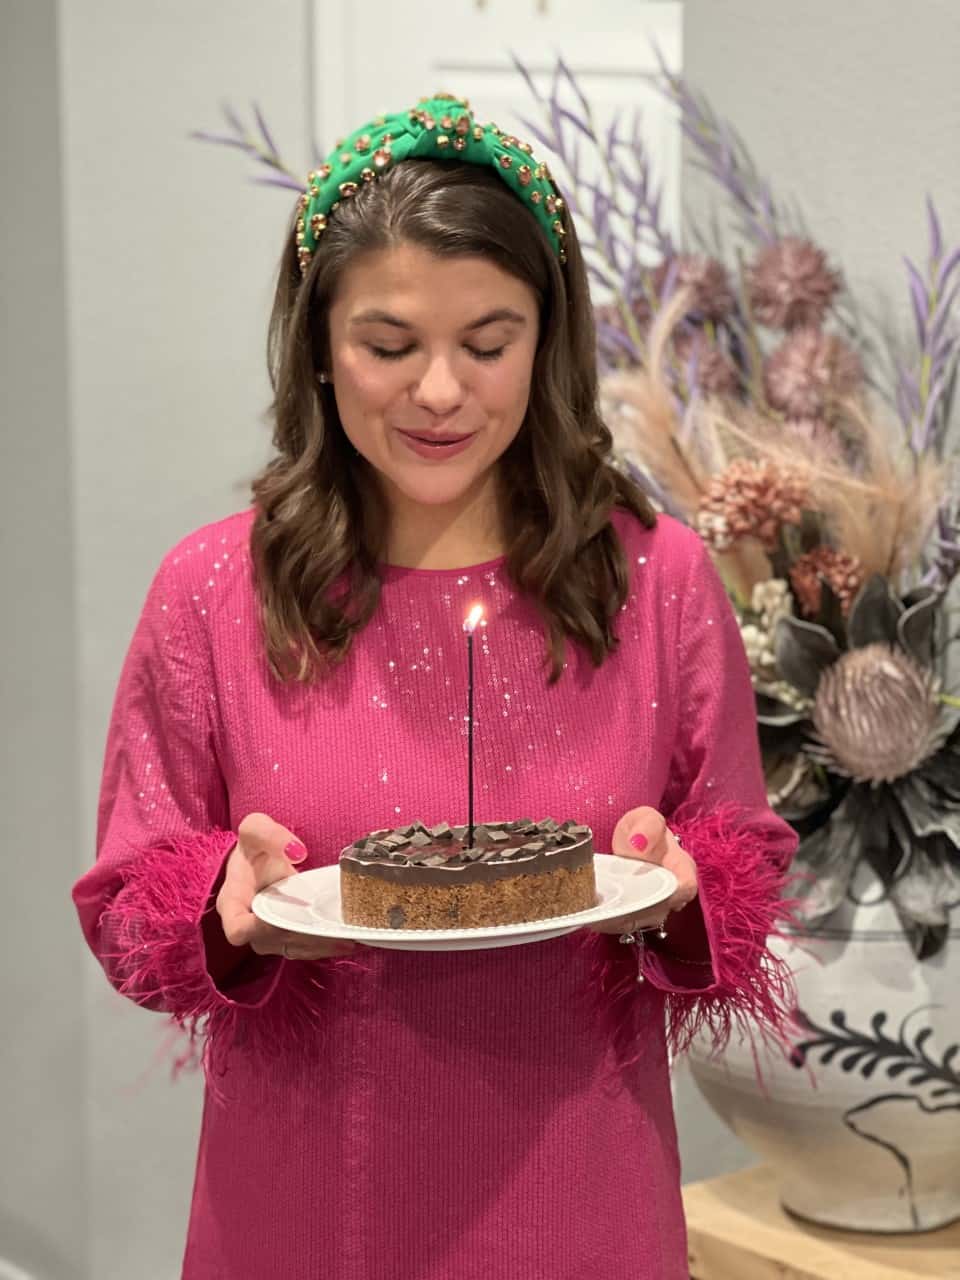 Picture of Allianna Moximchalk in a pink dress with a green headband holding a cookie cake with a candle in it.